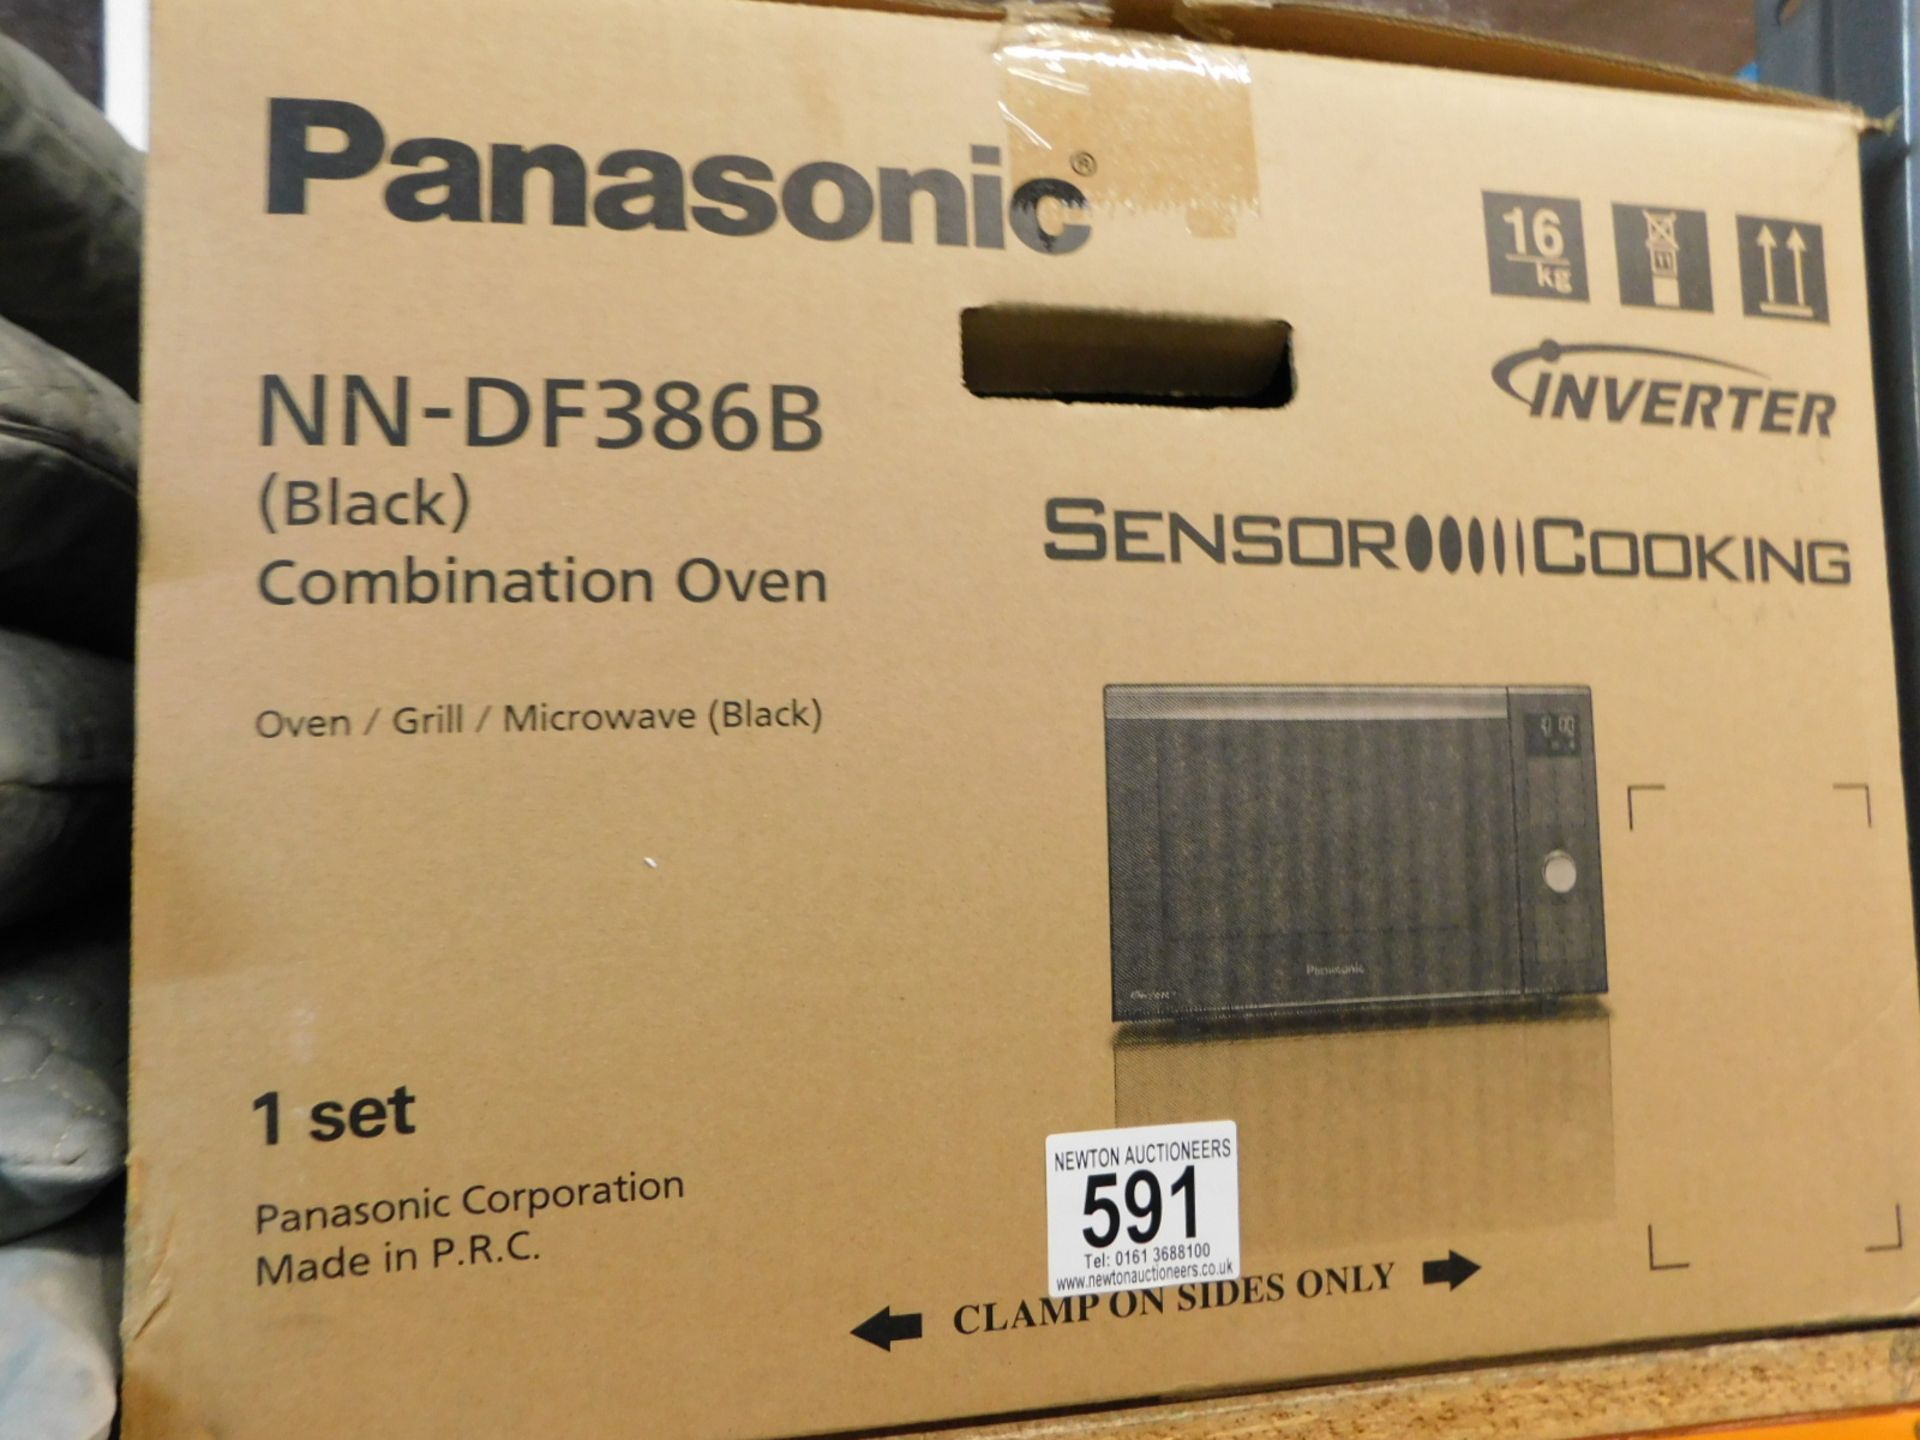 1 BOXED PANASONIC NN-DF386B 3-IN-1 1000W 23L BLACK COMBINATION MICROWAVE OVEN RRP Â£279.99